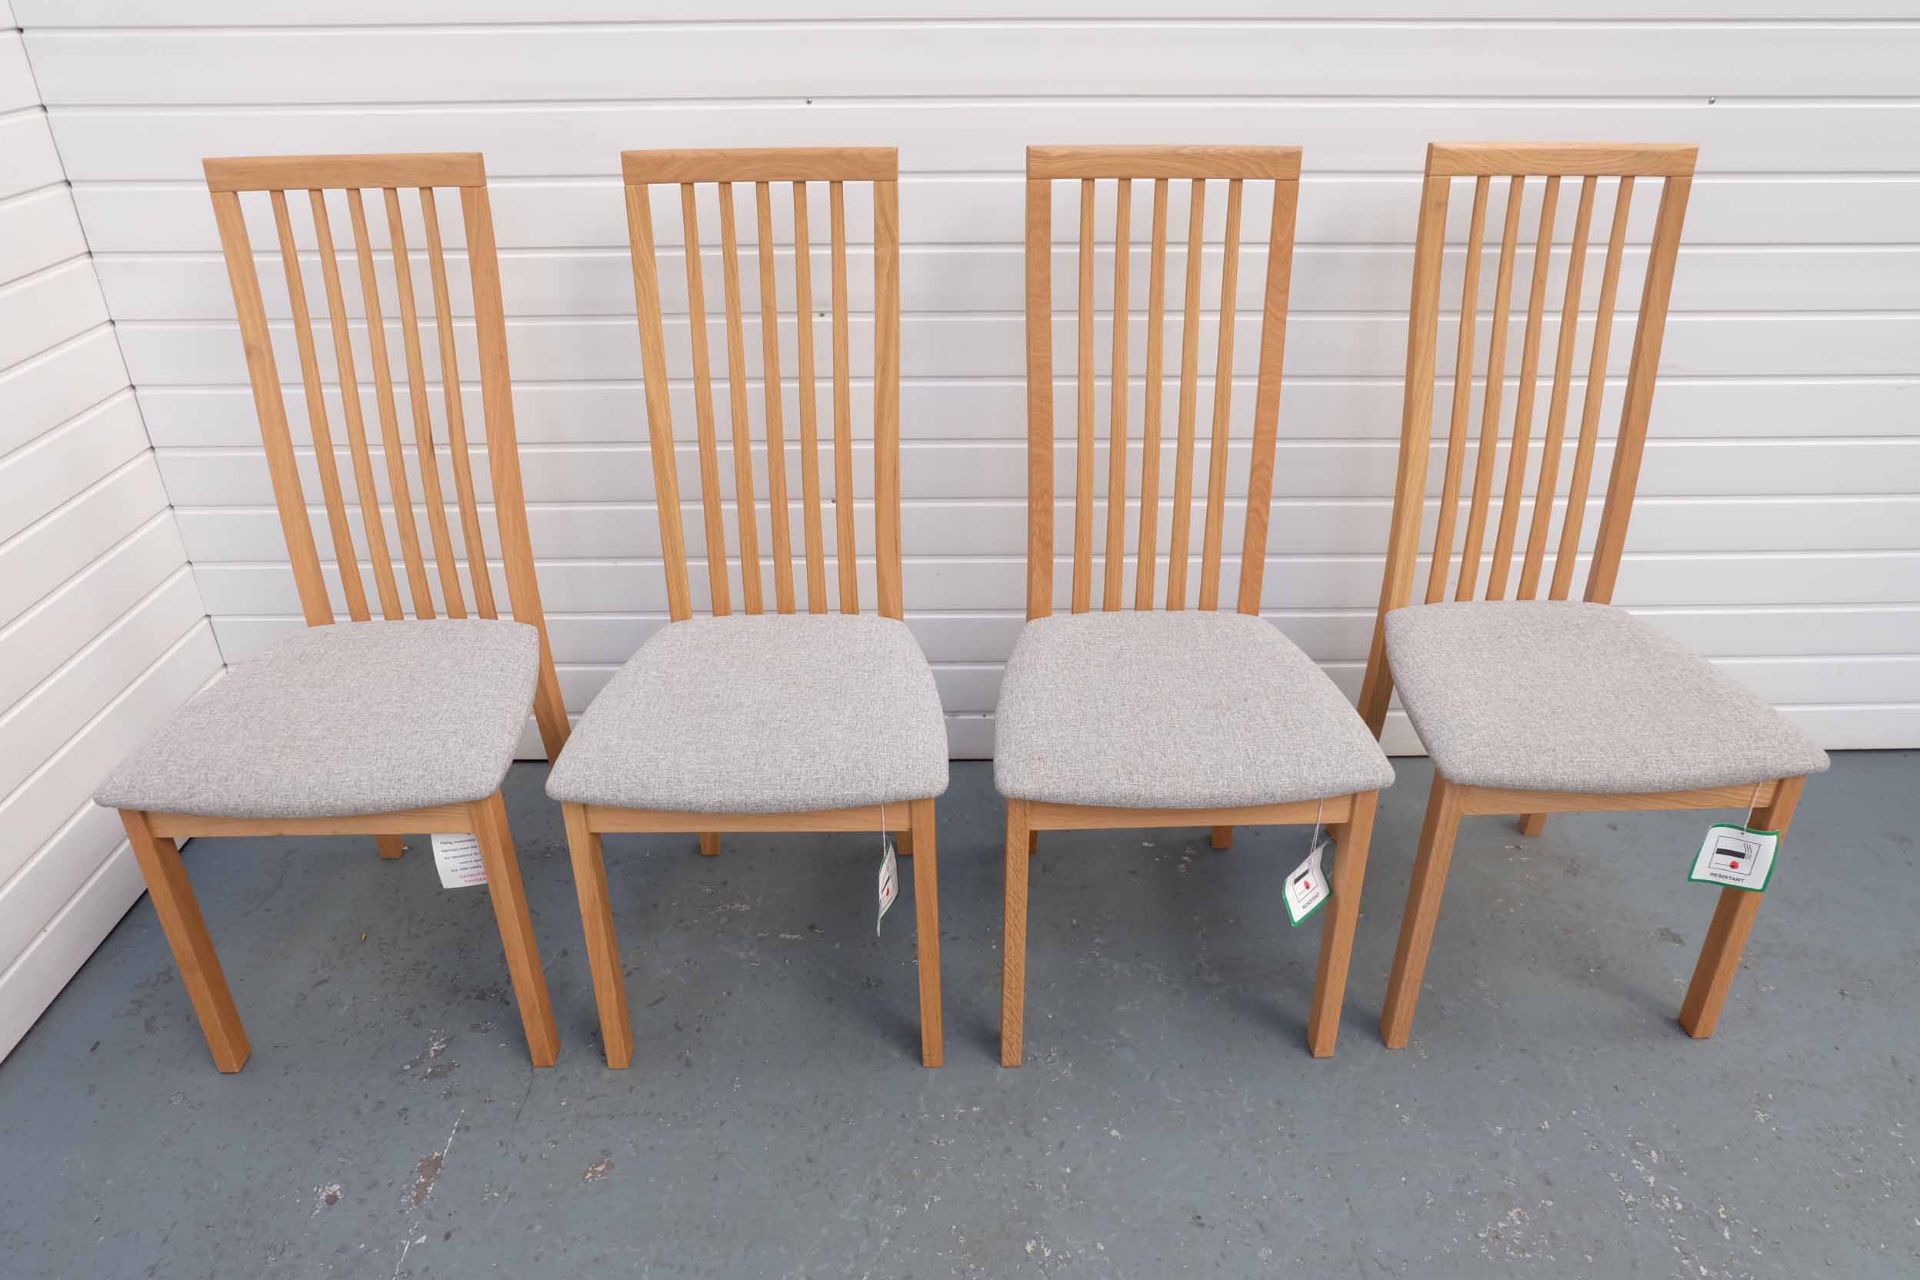 Set of 4 Furniture Link Wooden Dining Chairs With Upholstered Seats.